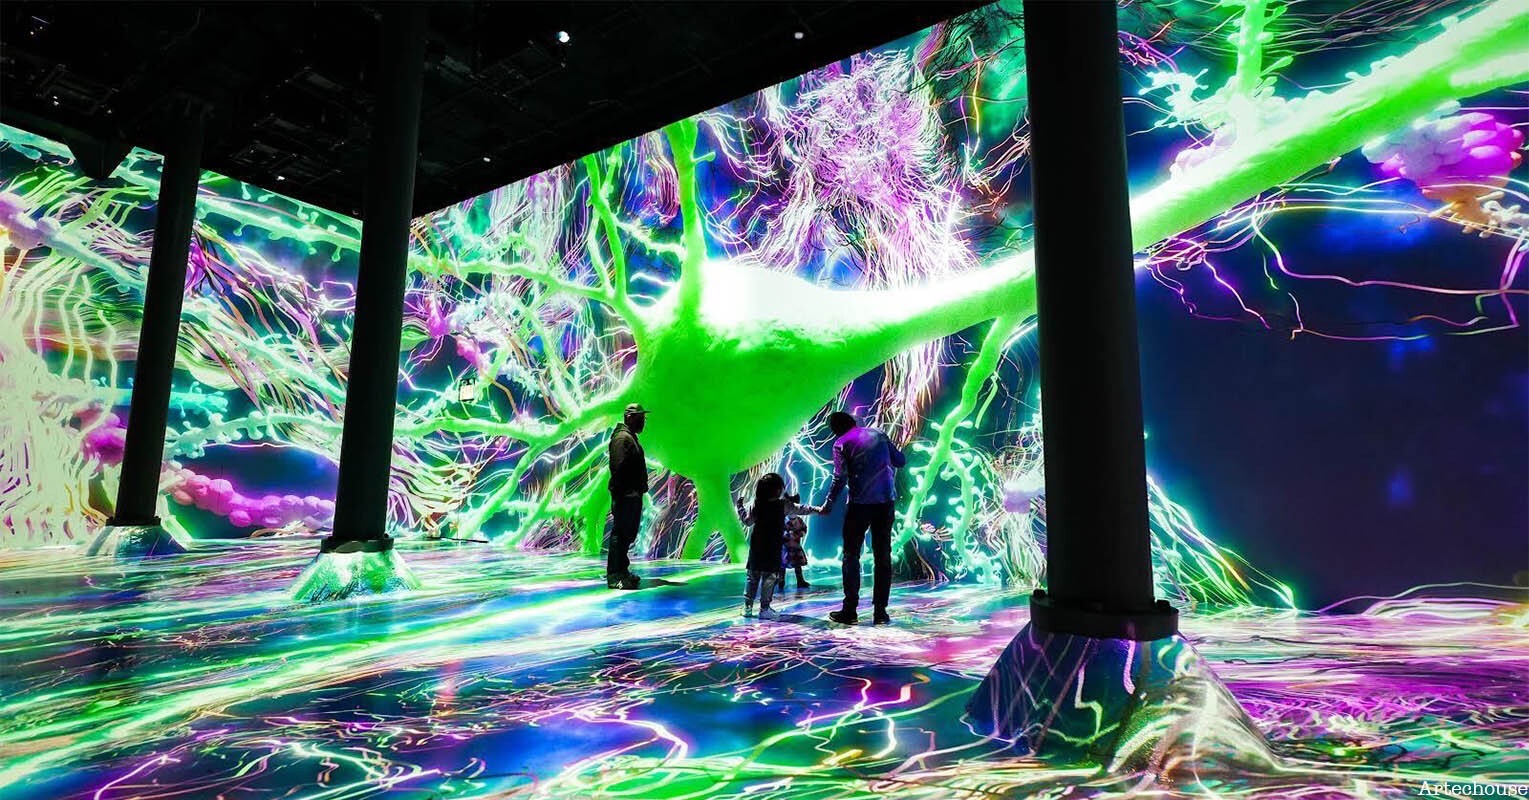 Adults and children stand inside an immersive art exhibition.